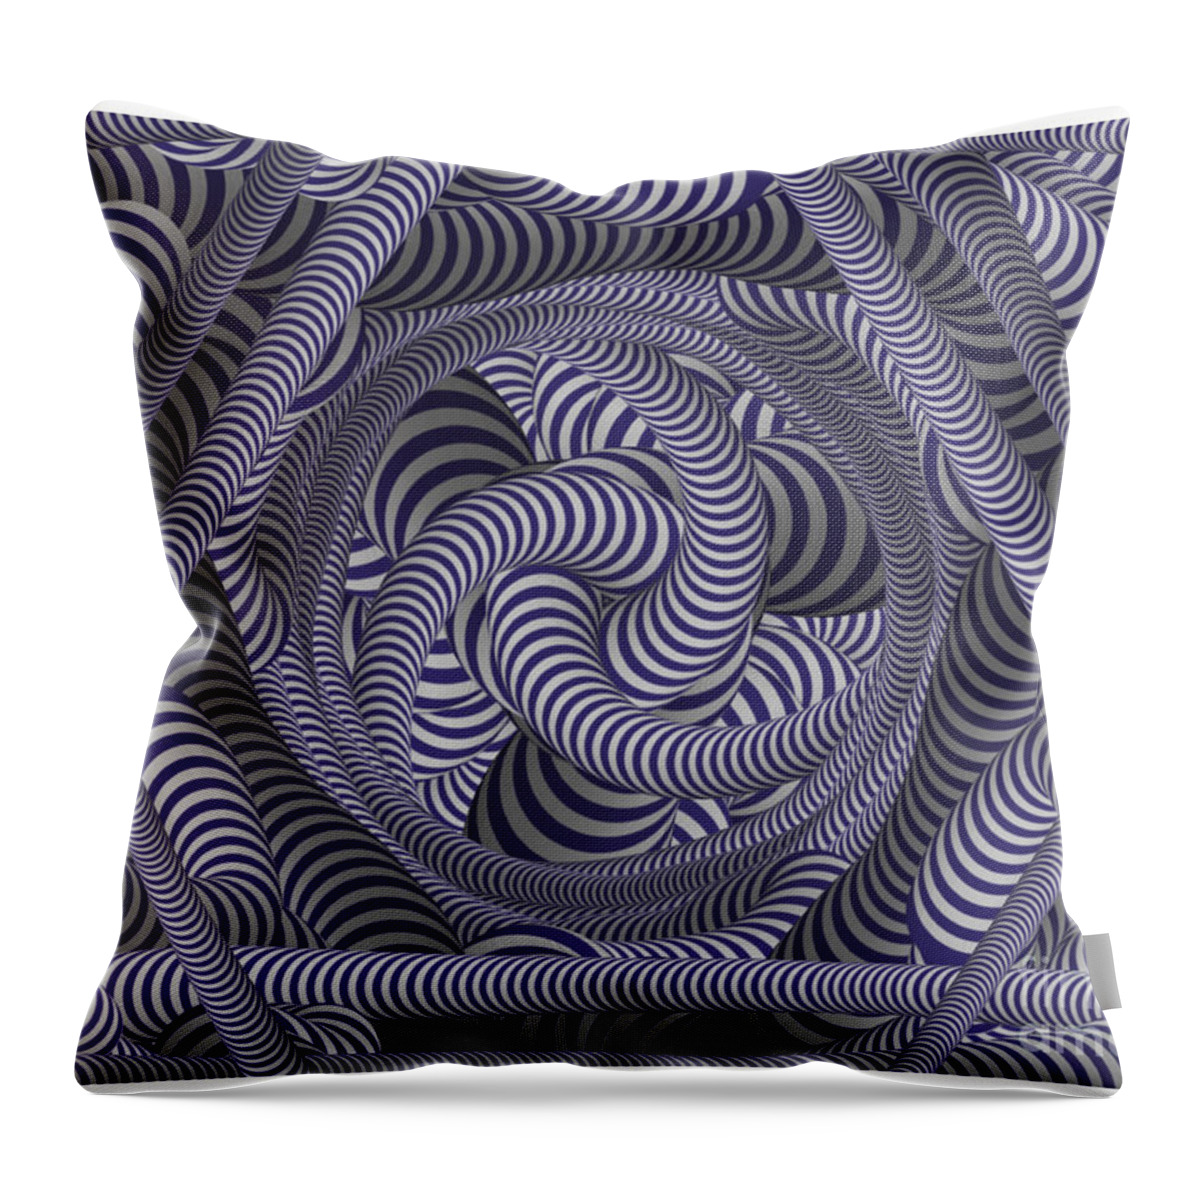 Illusion Throw Pillow featuring the digital art Nautical Coloured 3D Illusion by Barefoot Bodeez Art